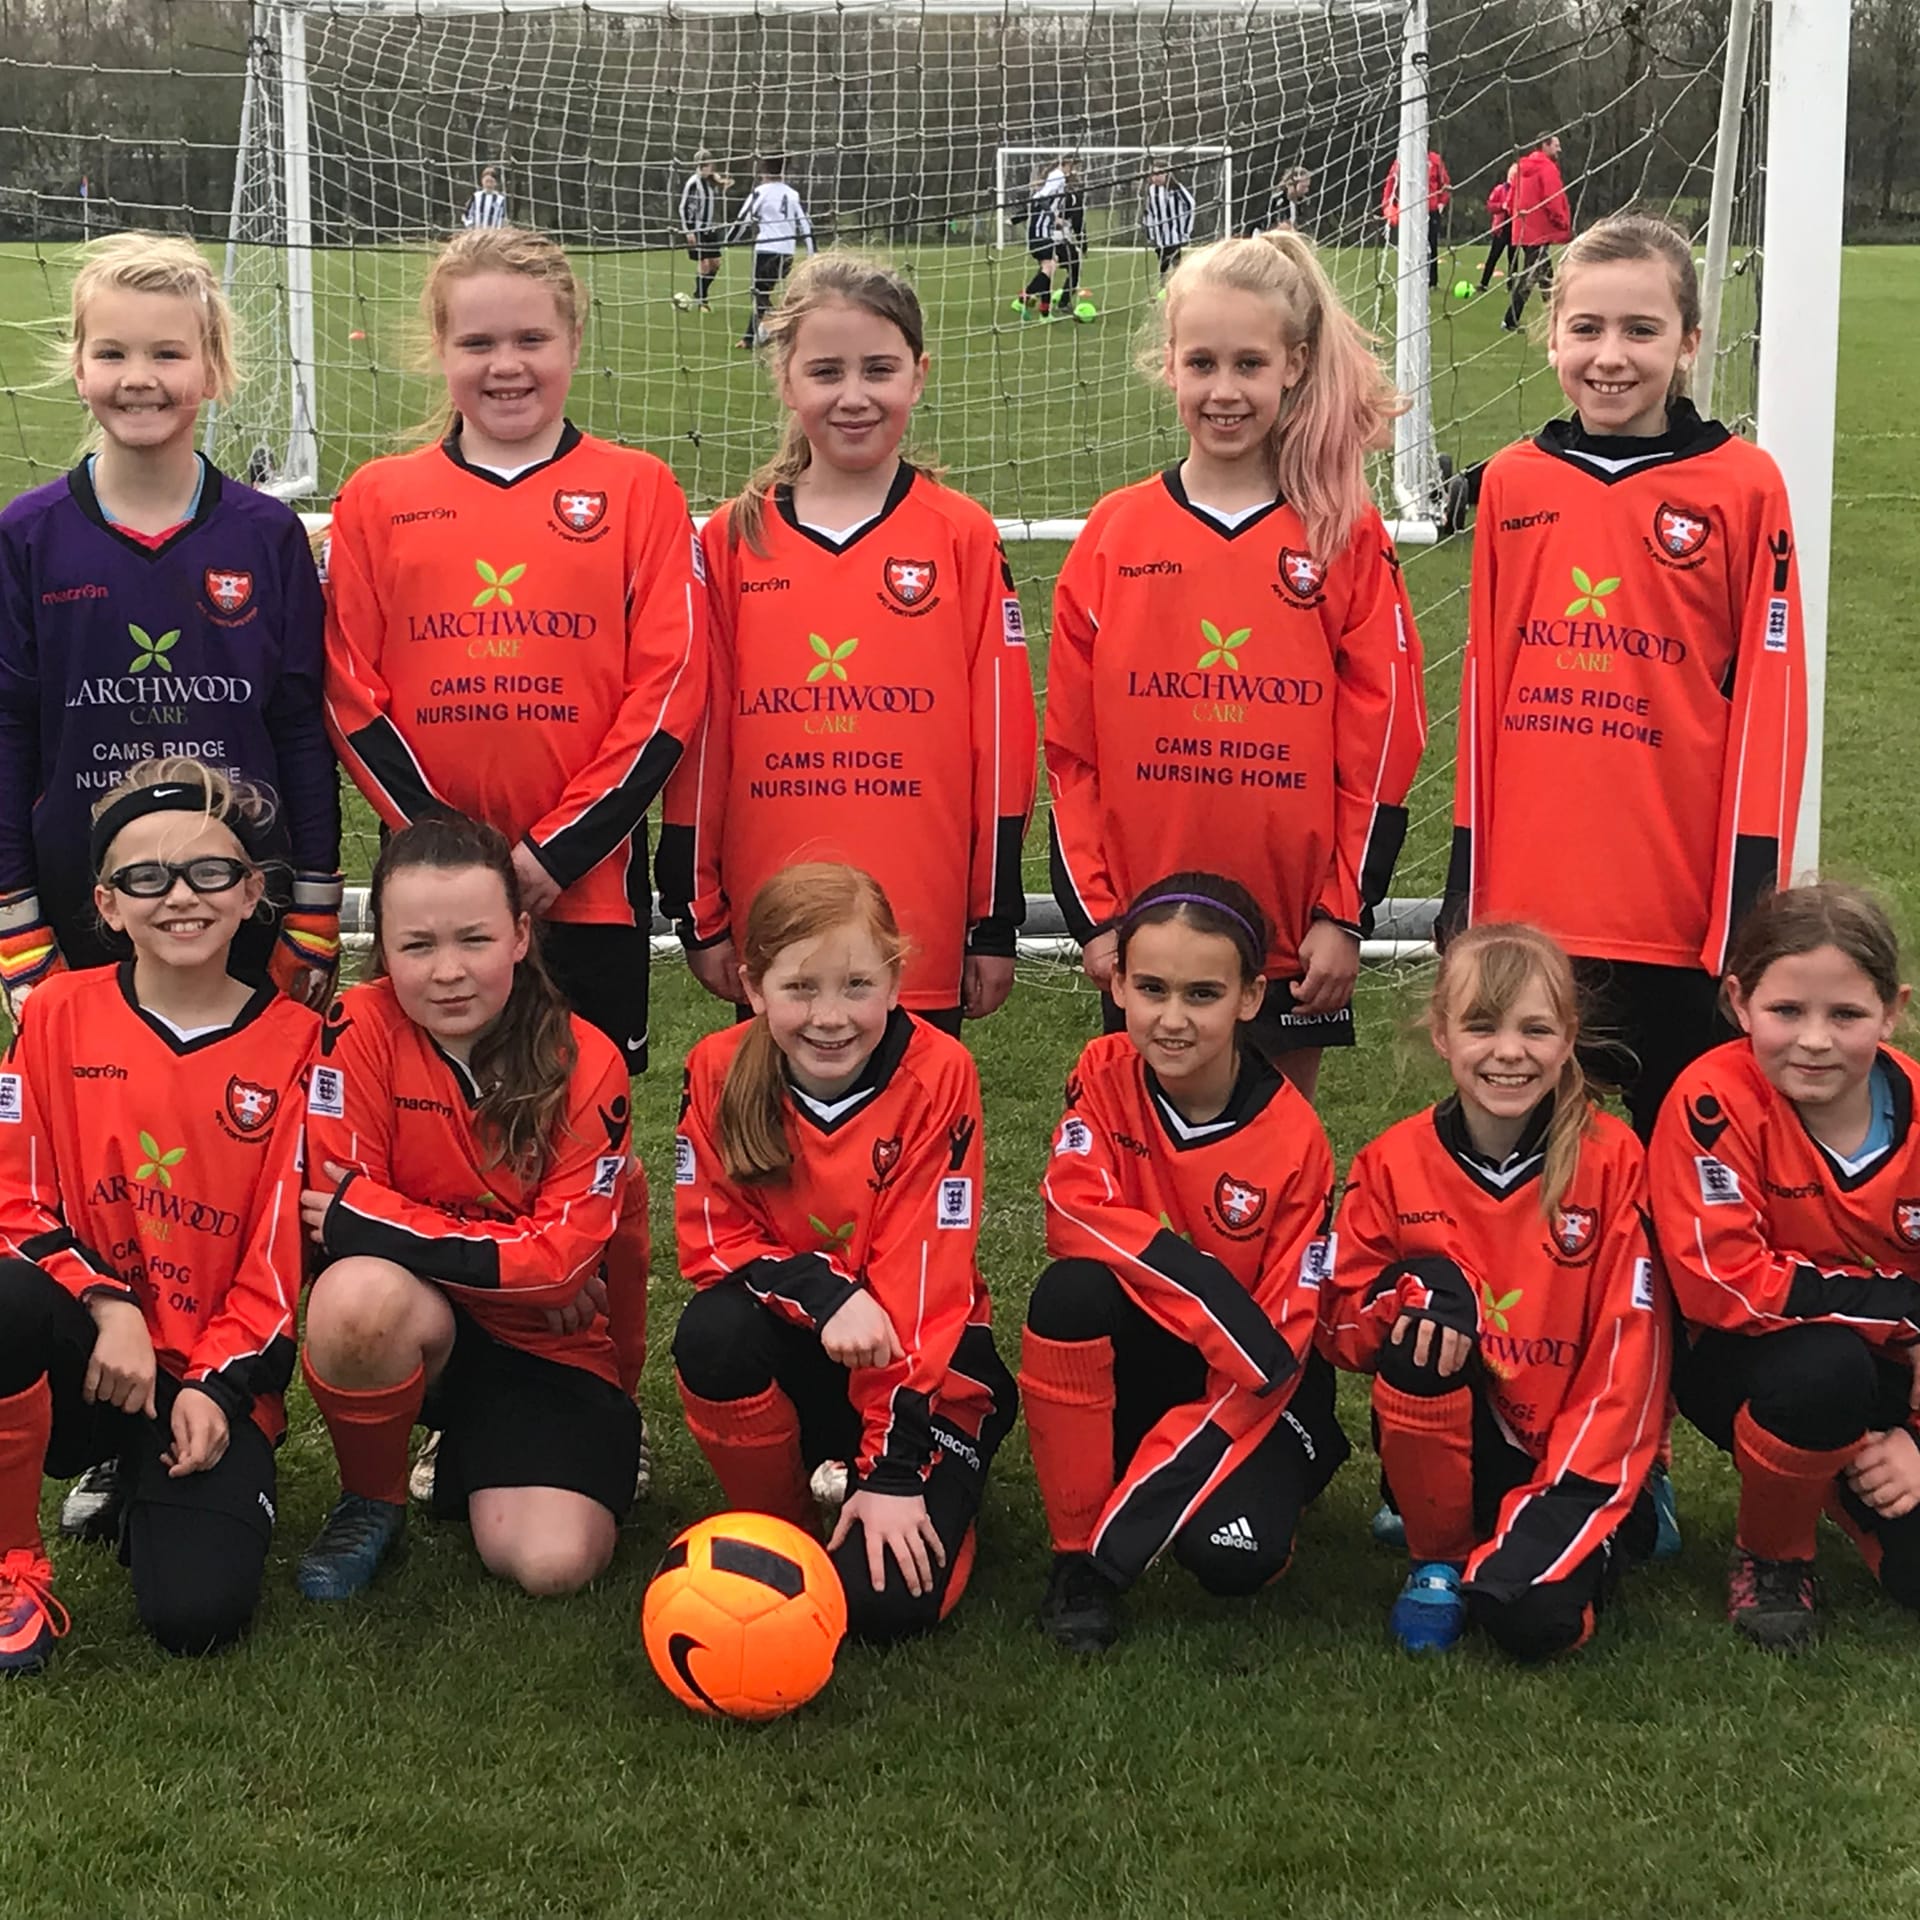 Cams Ridge Care Home in Fareham has sponsored AFC Portchester Youth FC Under 14 girls team.